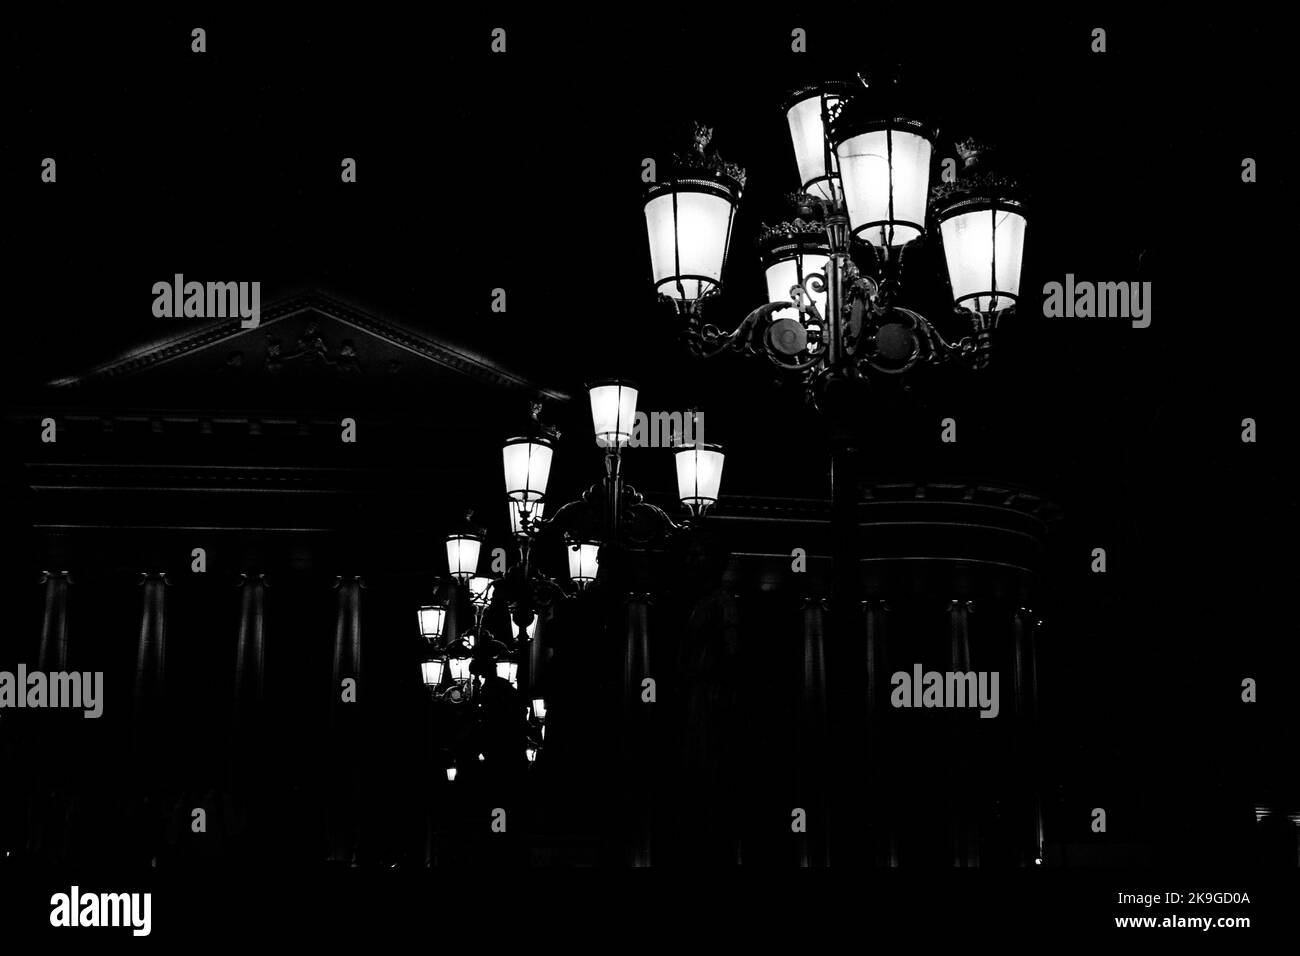 Lamp posts decorating the Bridge of Civilisations, in front of Archaeology Museum, Skopje, North Macedonia. Lit up at night, creating silhouette. Stock Photo